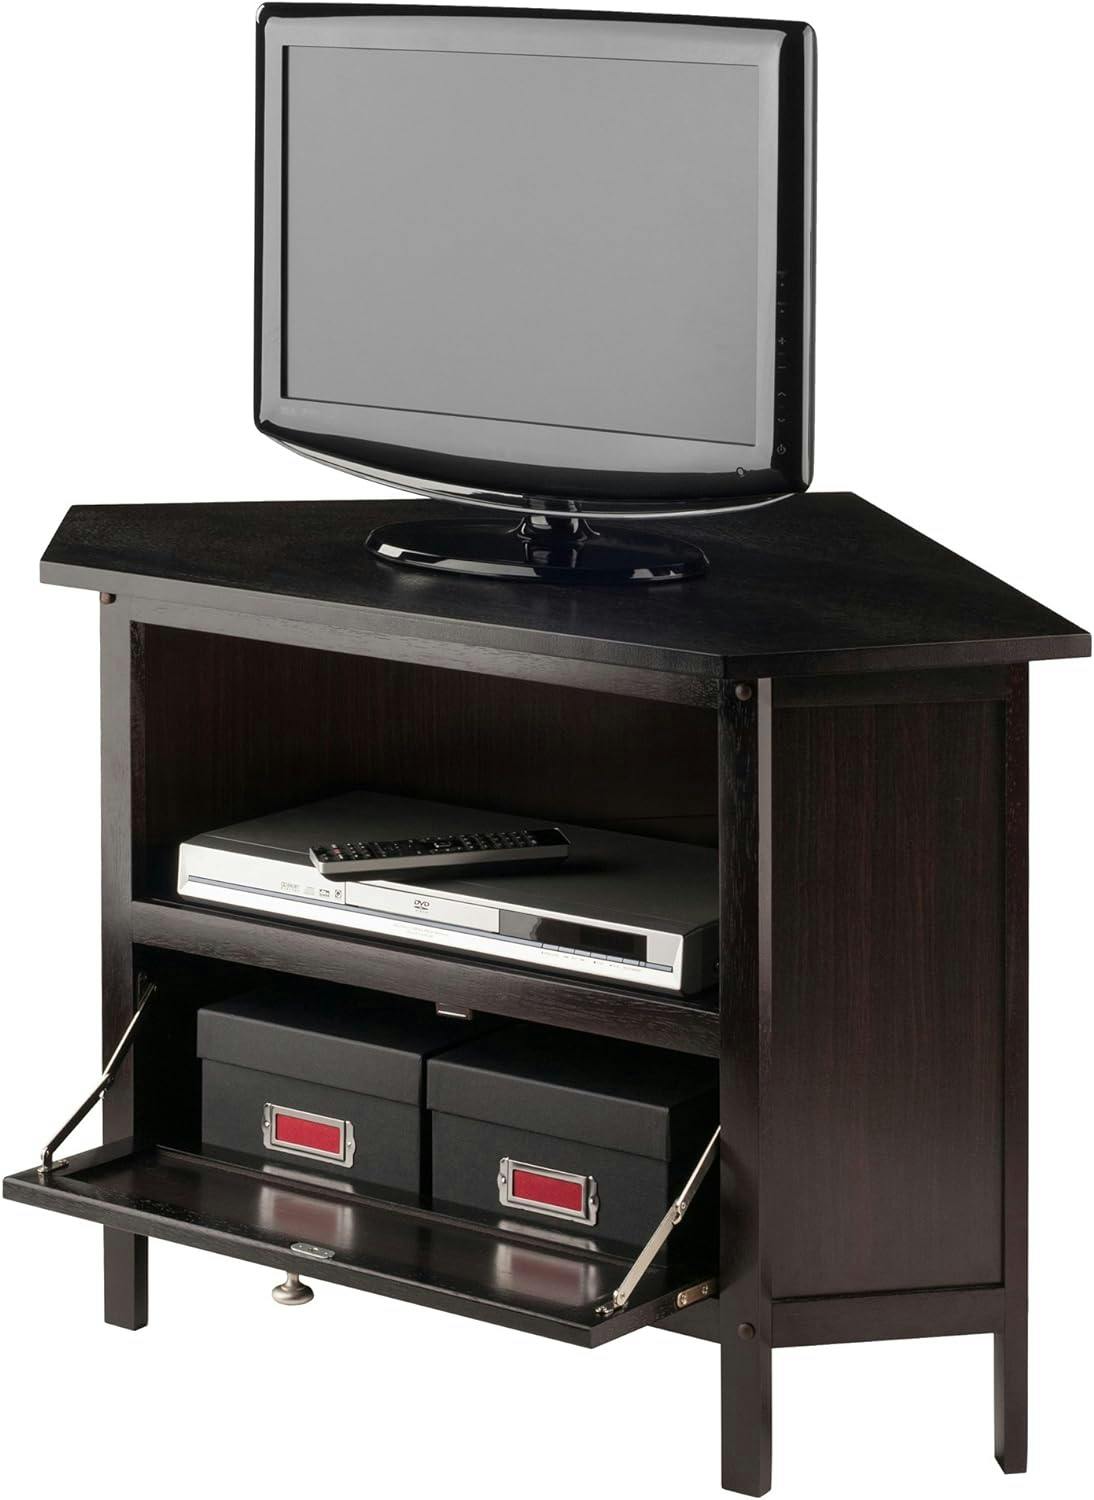 Transitional Espresso Corner TV Stand with Cabinet - Fits up to 27" TVs